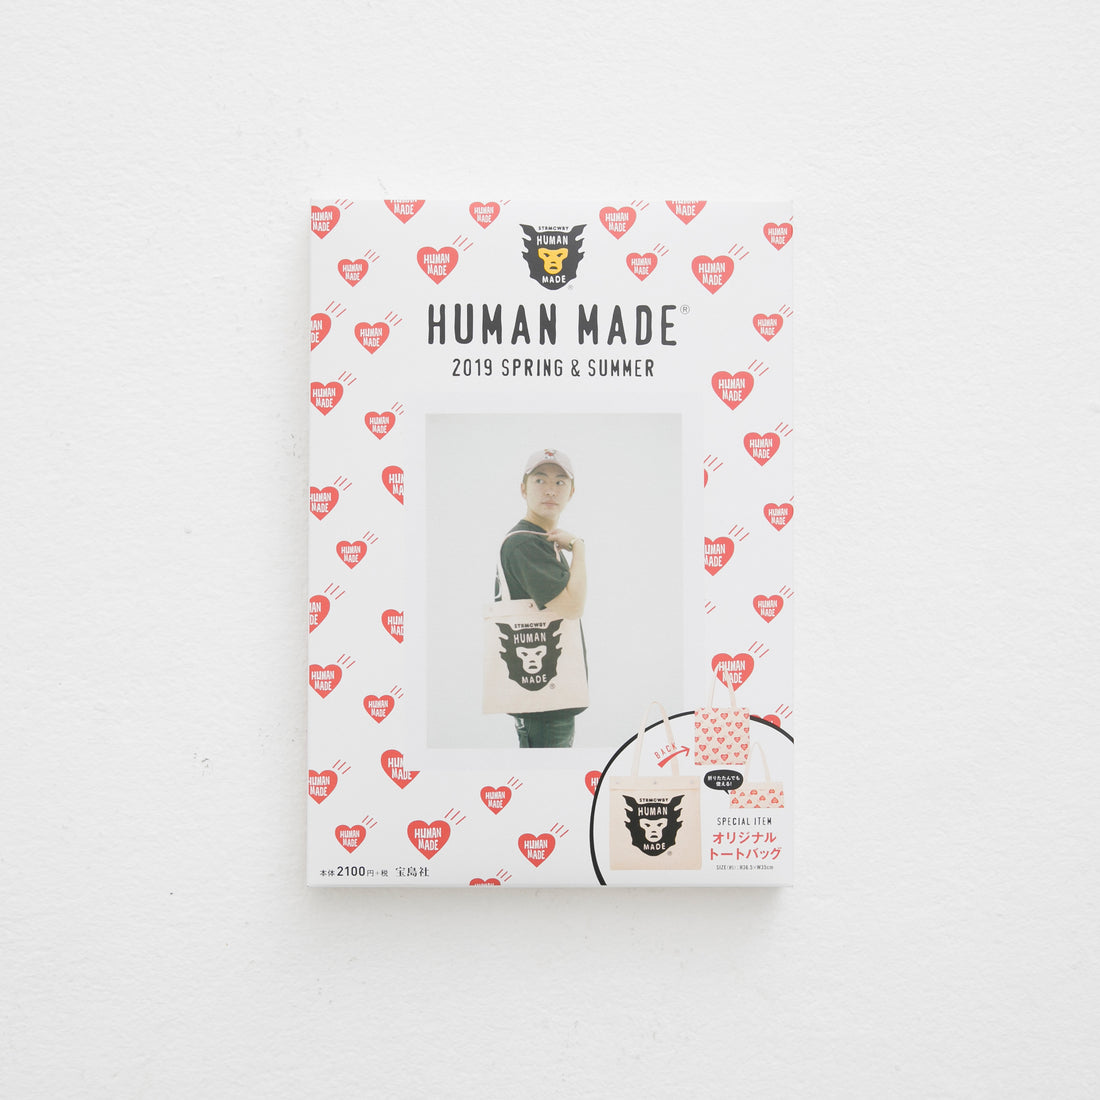 HUMAN MADE® 2019 SPRING & SUMMER SPECIAL BOOK